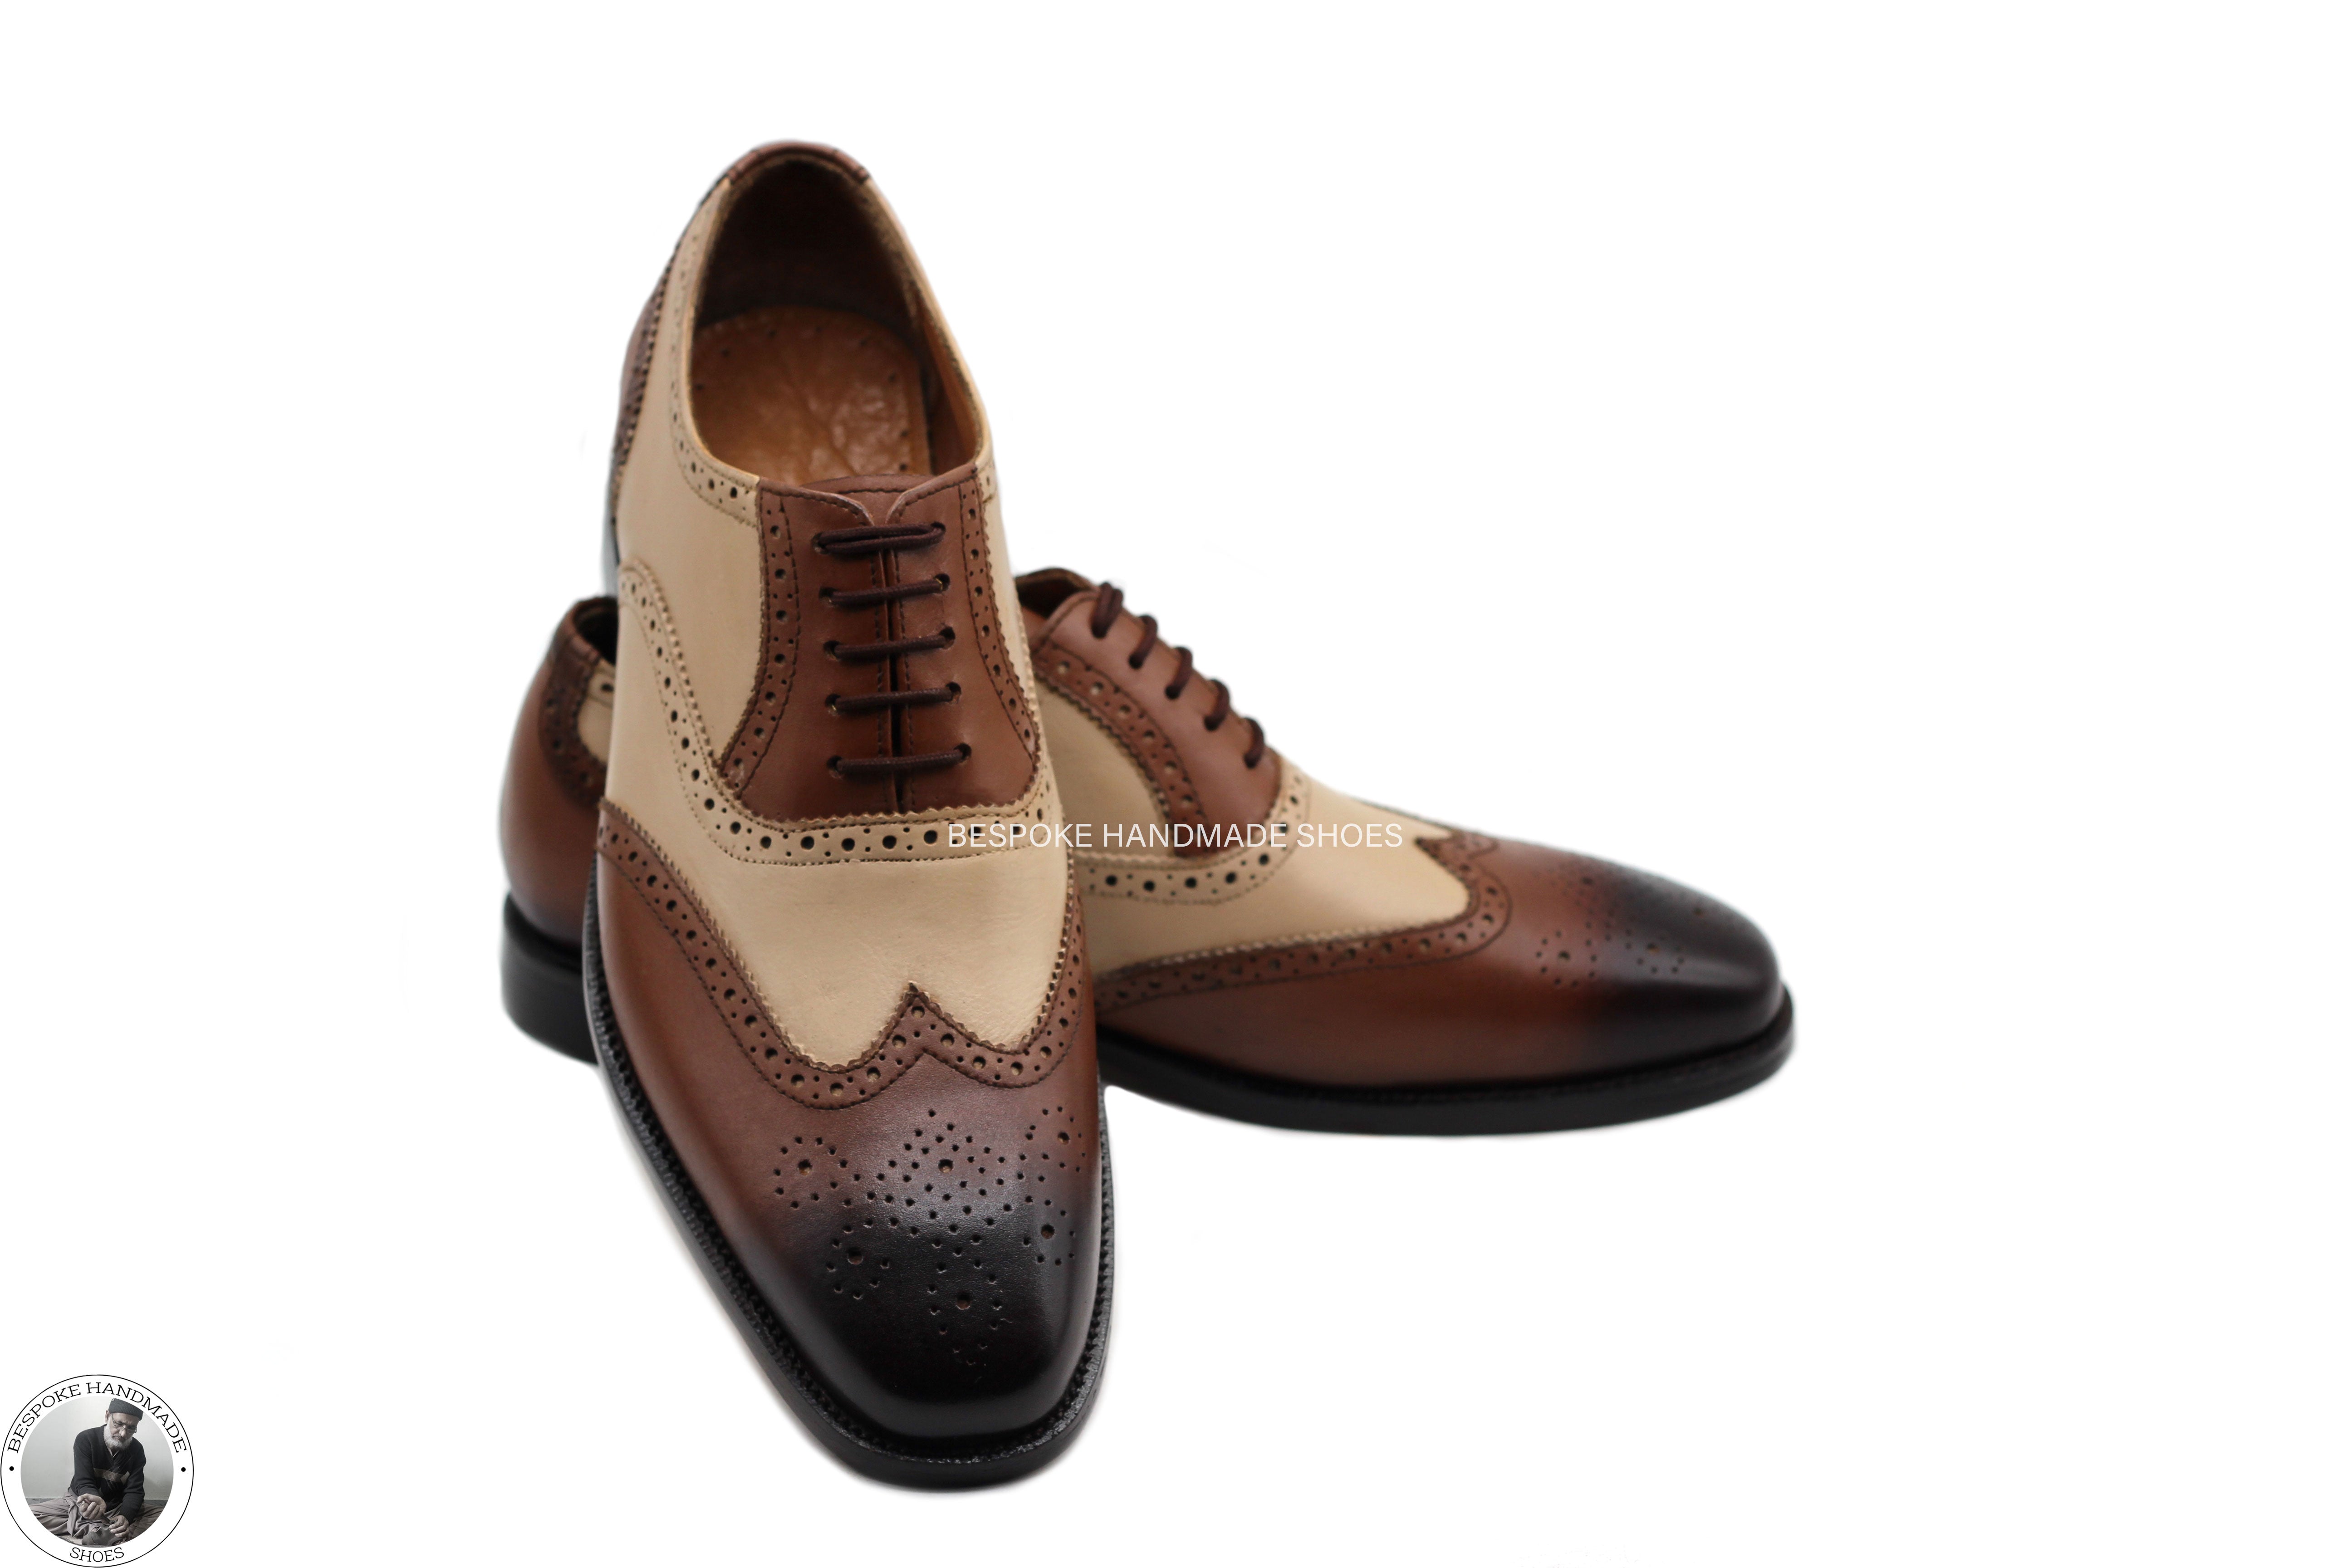 Bespoke Handmade GoodyearCream And Brown Leather Oxford Wingtip Brogue Dress / Formal Shoes